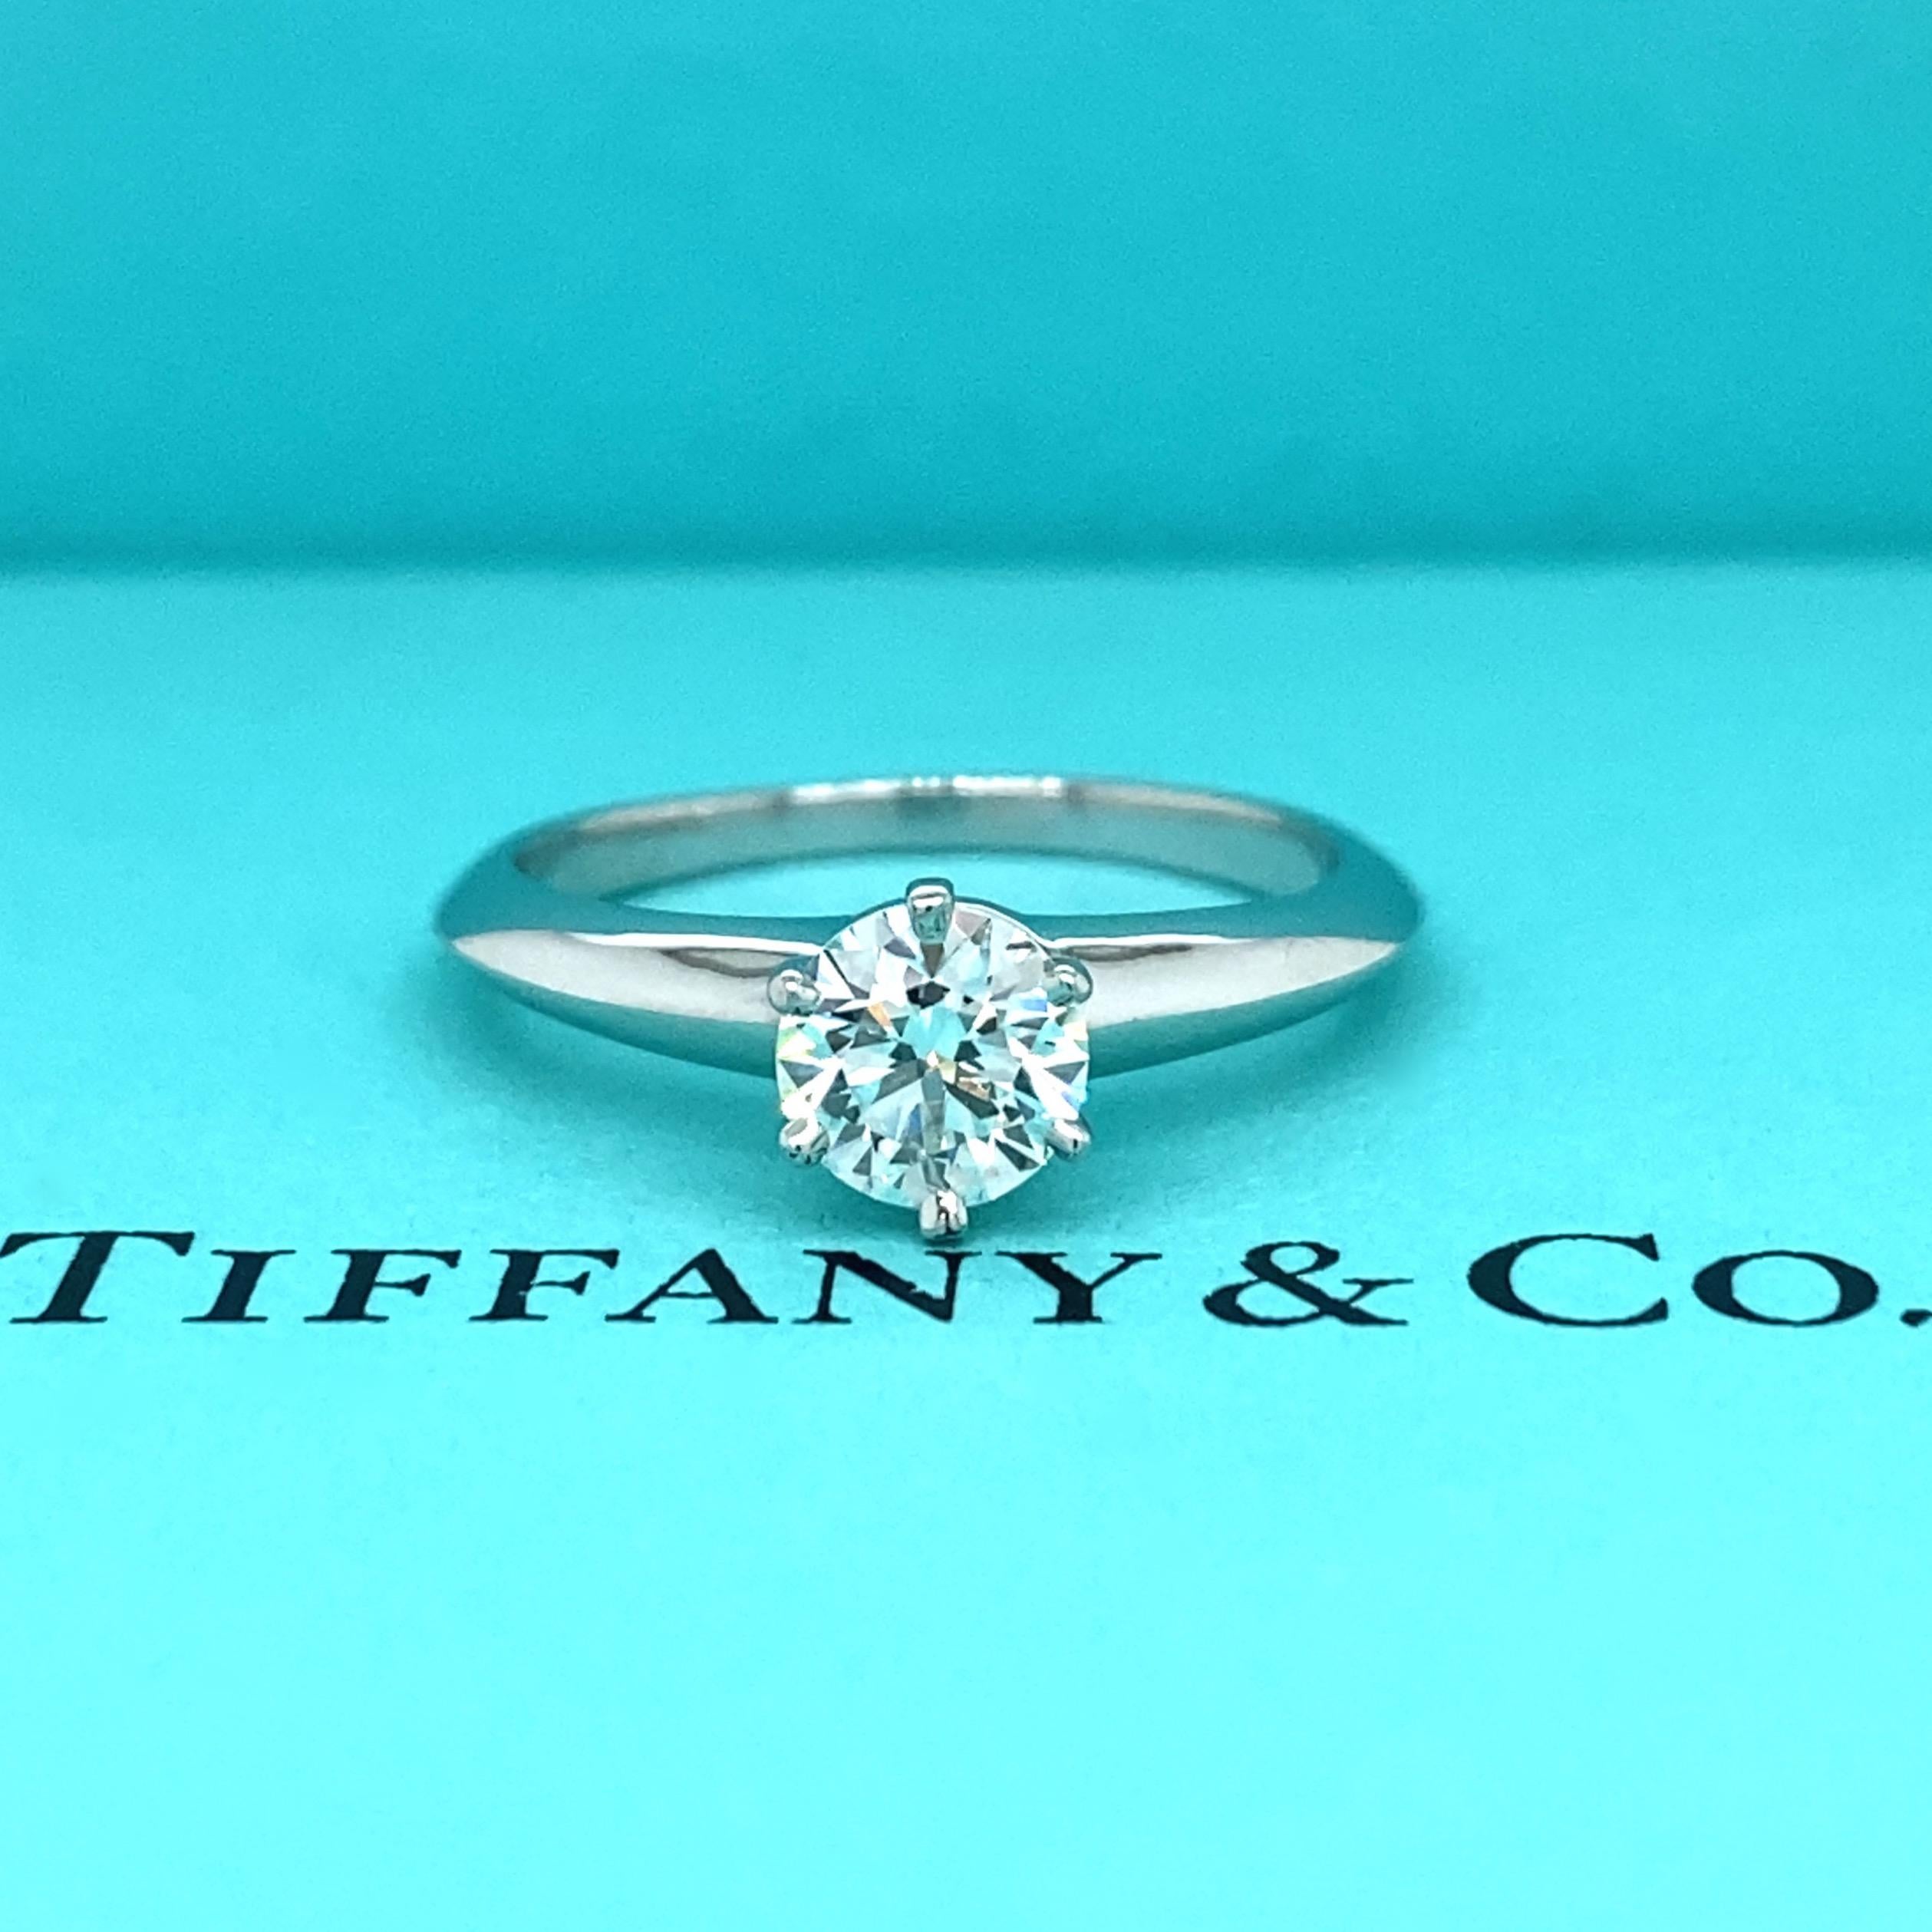 Tiffany & Co Solitaire Engagement Ring
Style:  Classic 6-Prong 
Ref. number:  18617595/E12230183
Metal:  Platinum PT950
Size:  6 sizable
TCW:  0.60 cts
Main Diamond:  Round Brilliant Cut
Color & Clarity:  I / VVS1 
Hallmark:  ©TIFFANY&CO. PT950